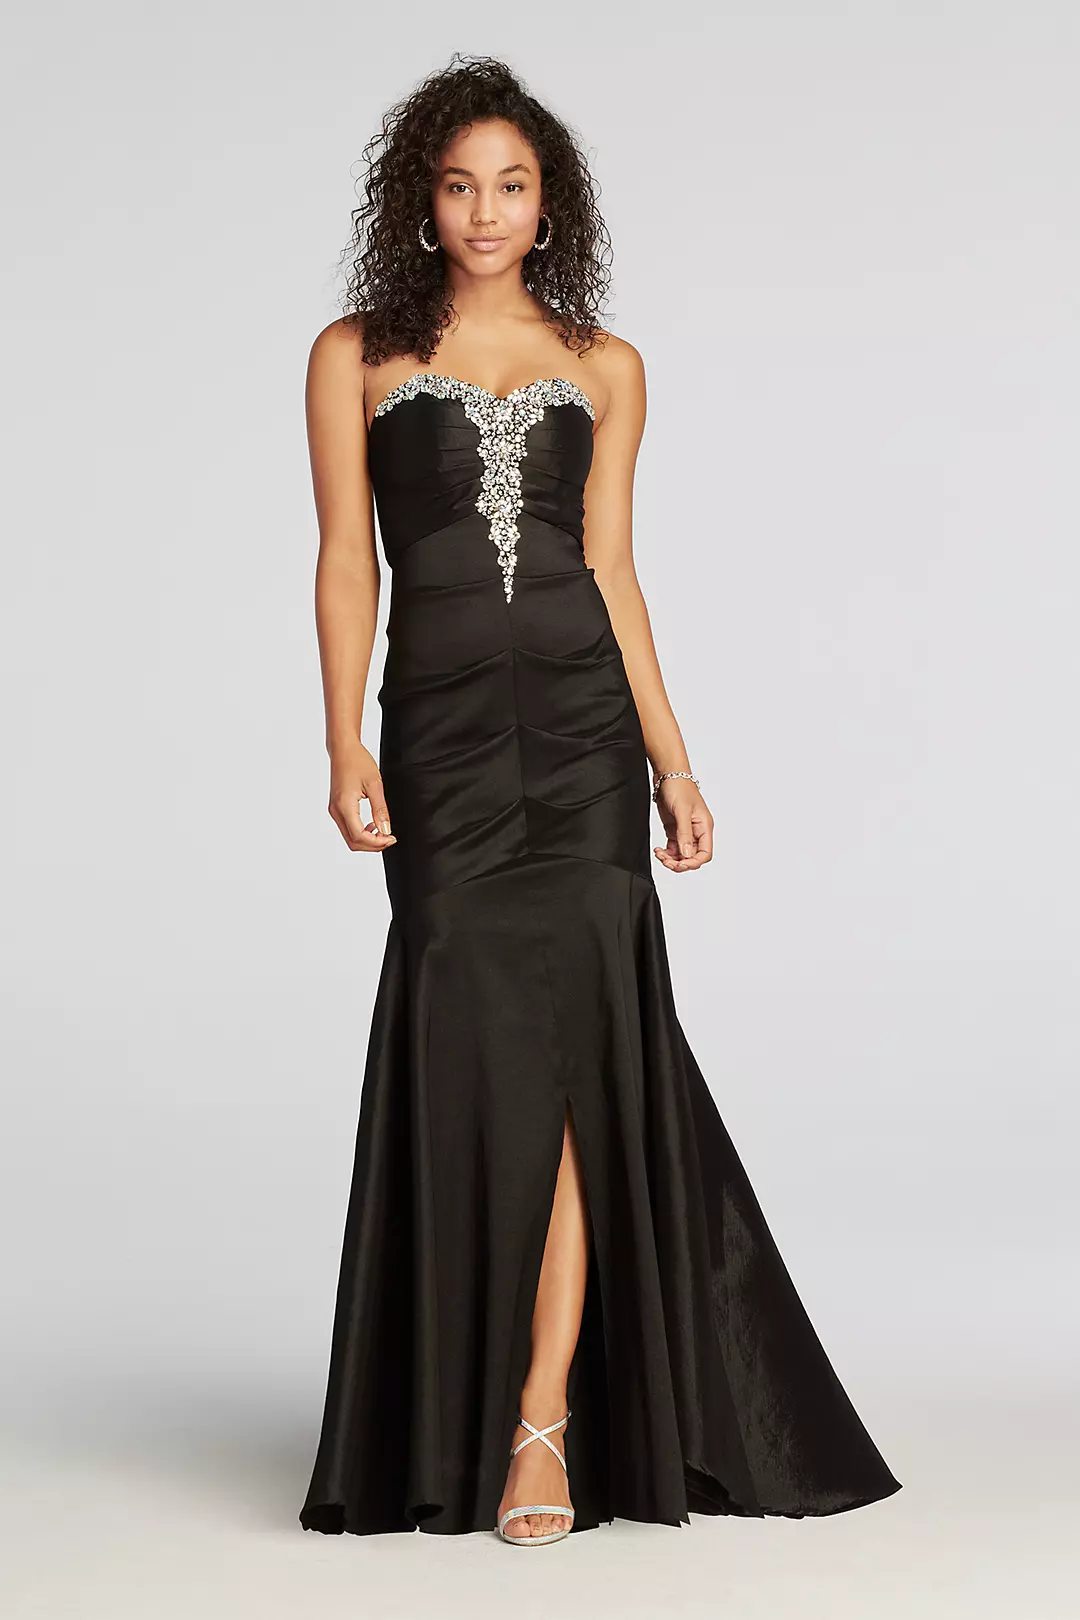 Strapless Ruched Taffeta Beaded Prom Dress Image